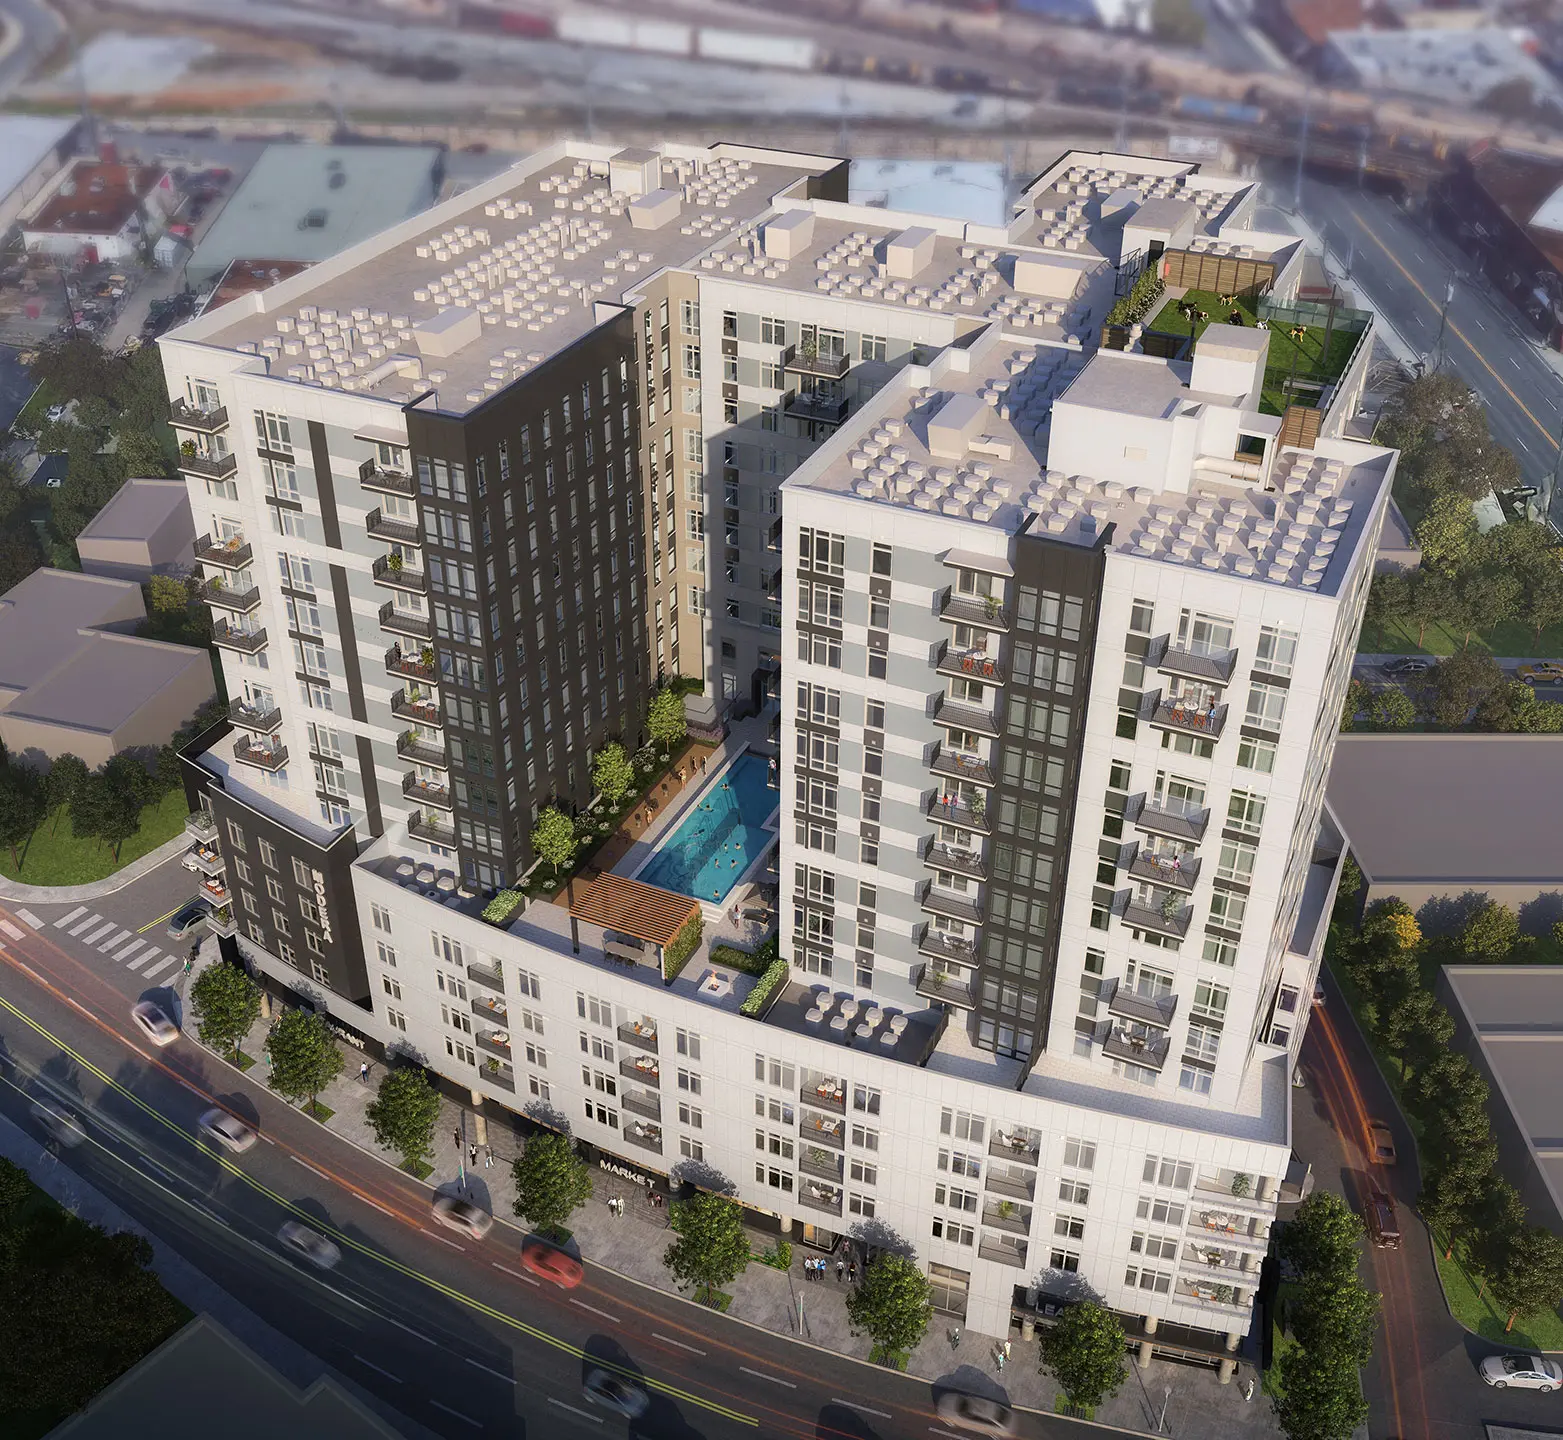 modera-gulch-cooper-carry-multifamily-residential-rendering-exterior-birdseye-poolview